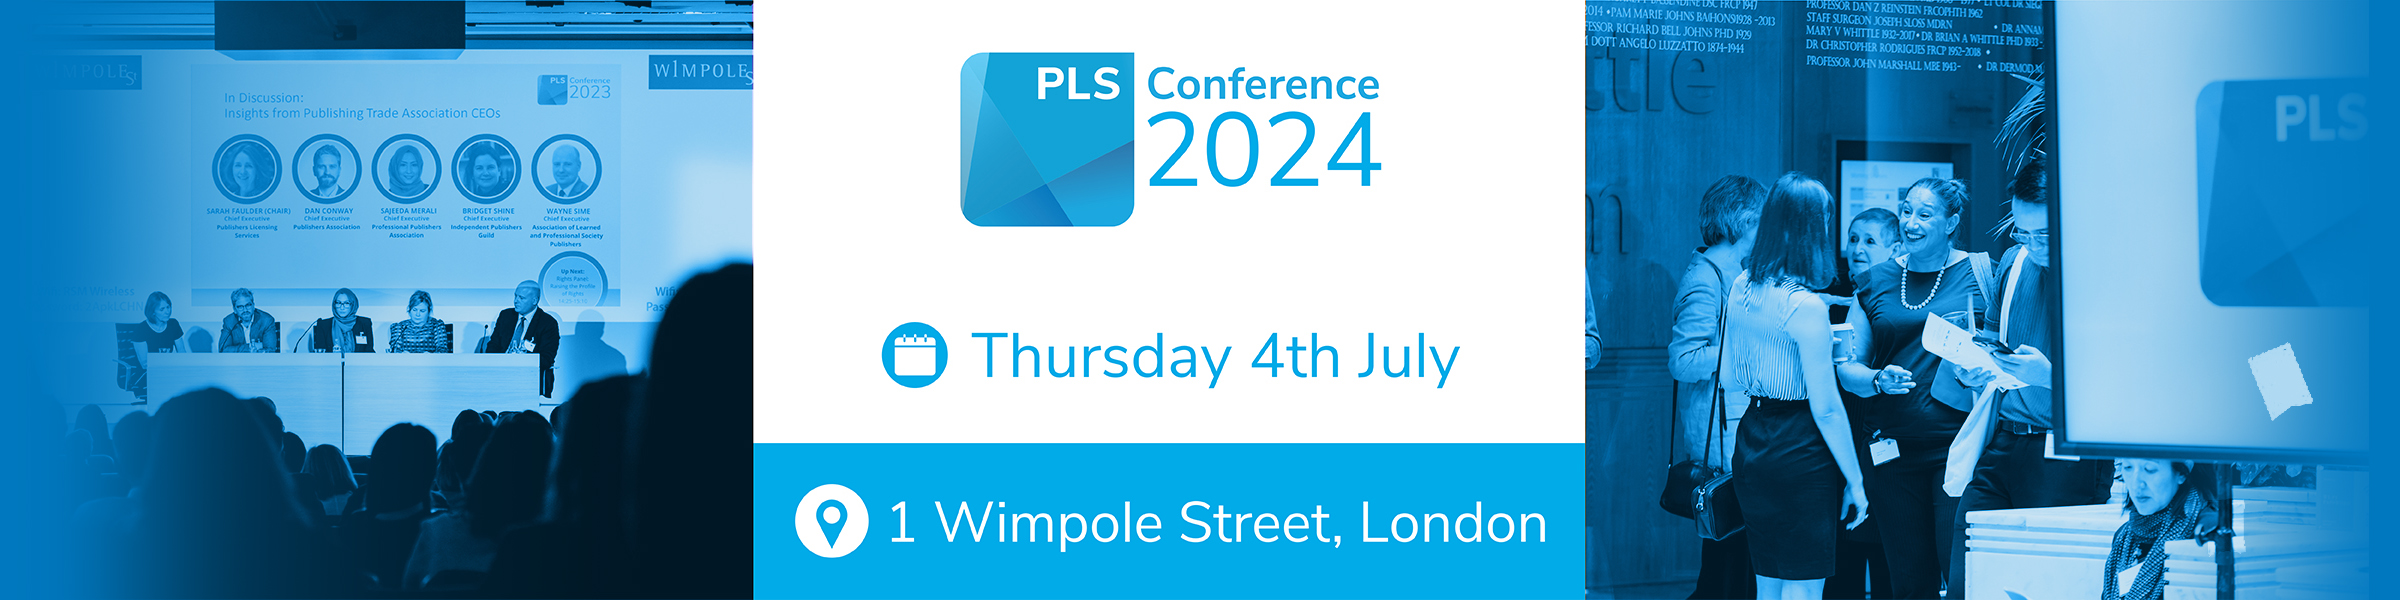 PLS conference 2024 - Save the Date